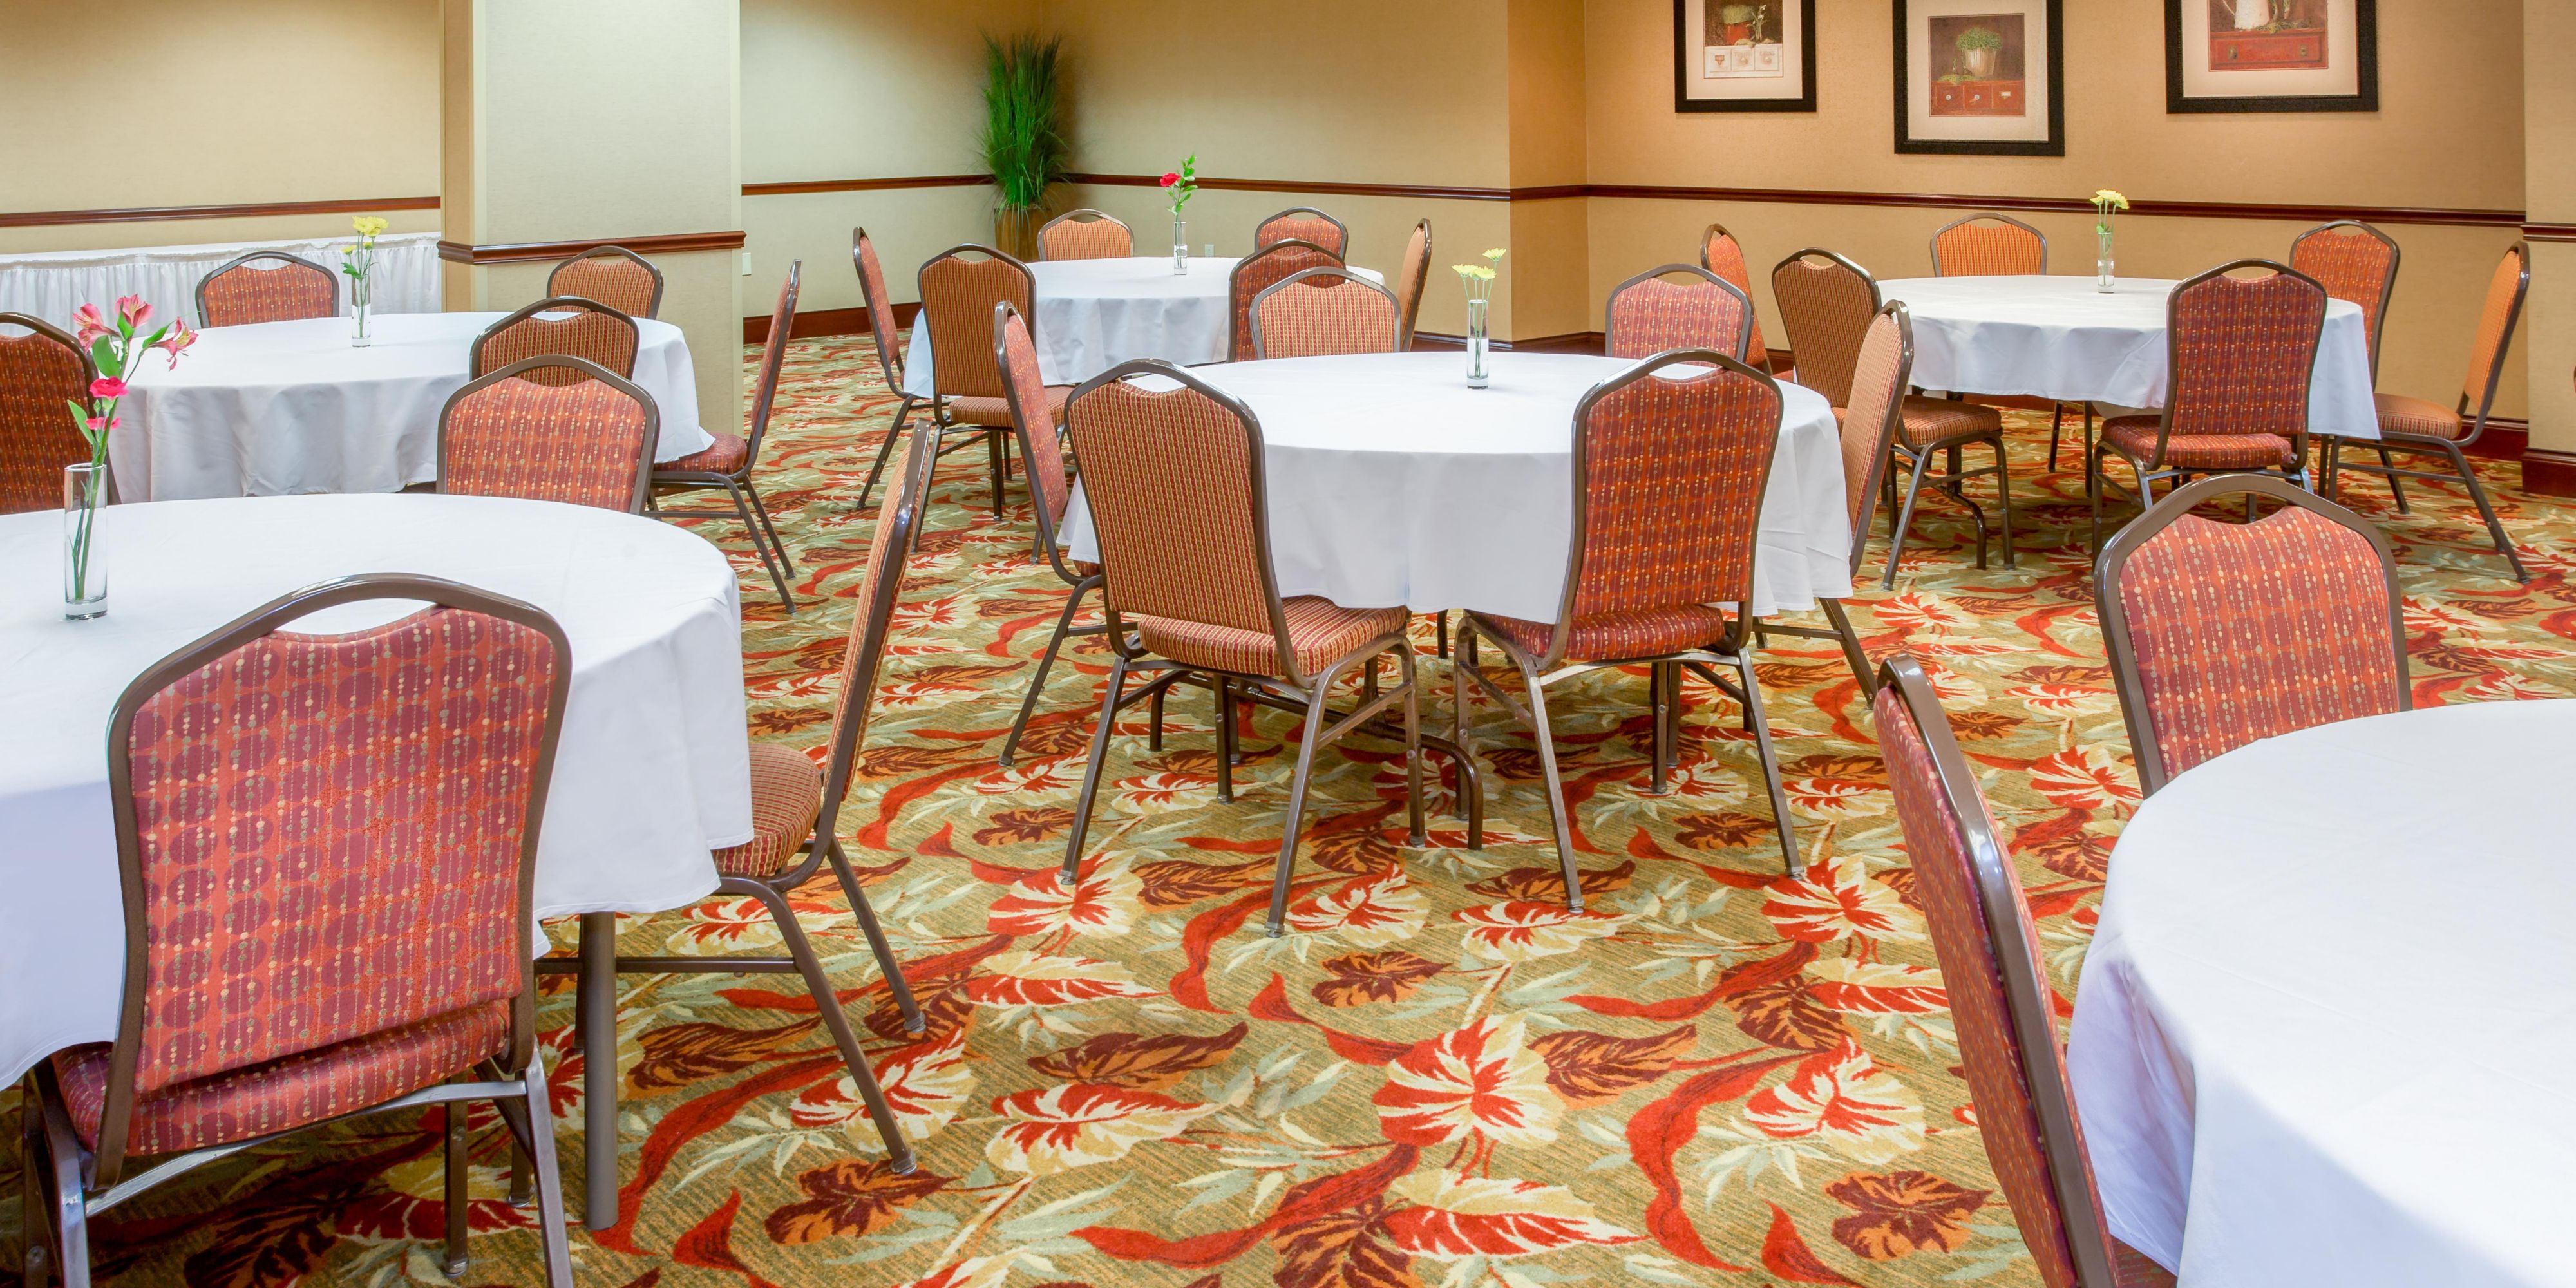 Experience our versatile 2400 square feet of space for your next event.  Perfect for small to medium-sized groups, we will work with you to set up all the essentials you need for your meeting including catering and A/V equipment.